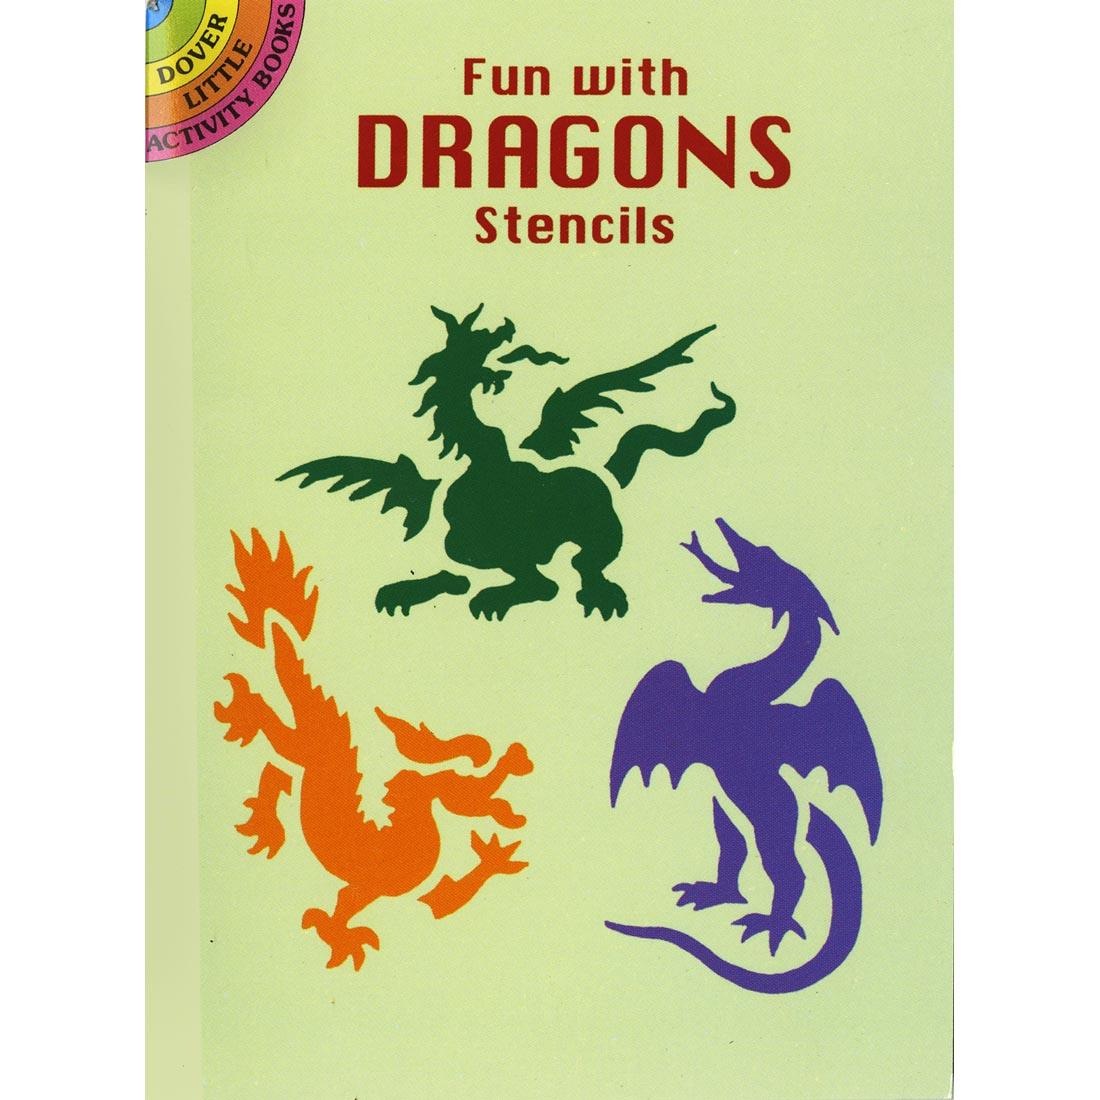 Dover Little Activity Book Fun With Dragons Stencils